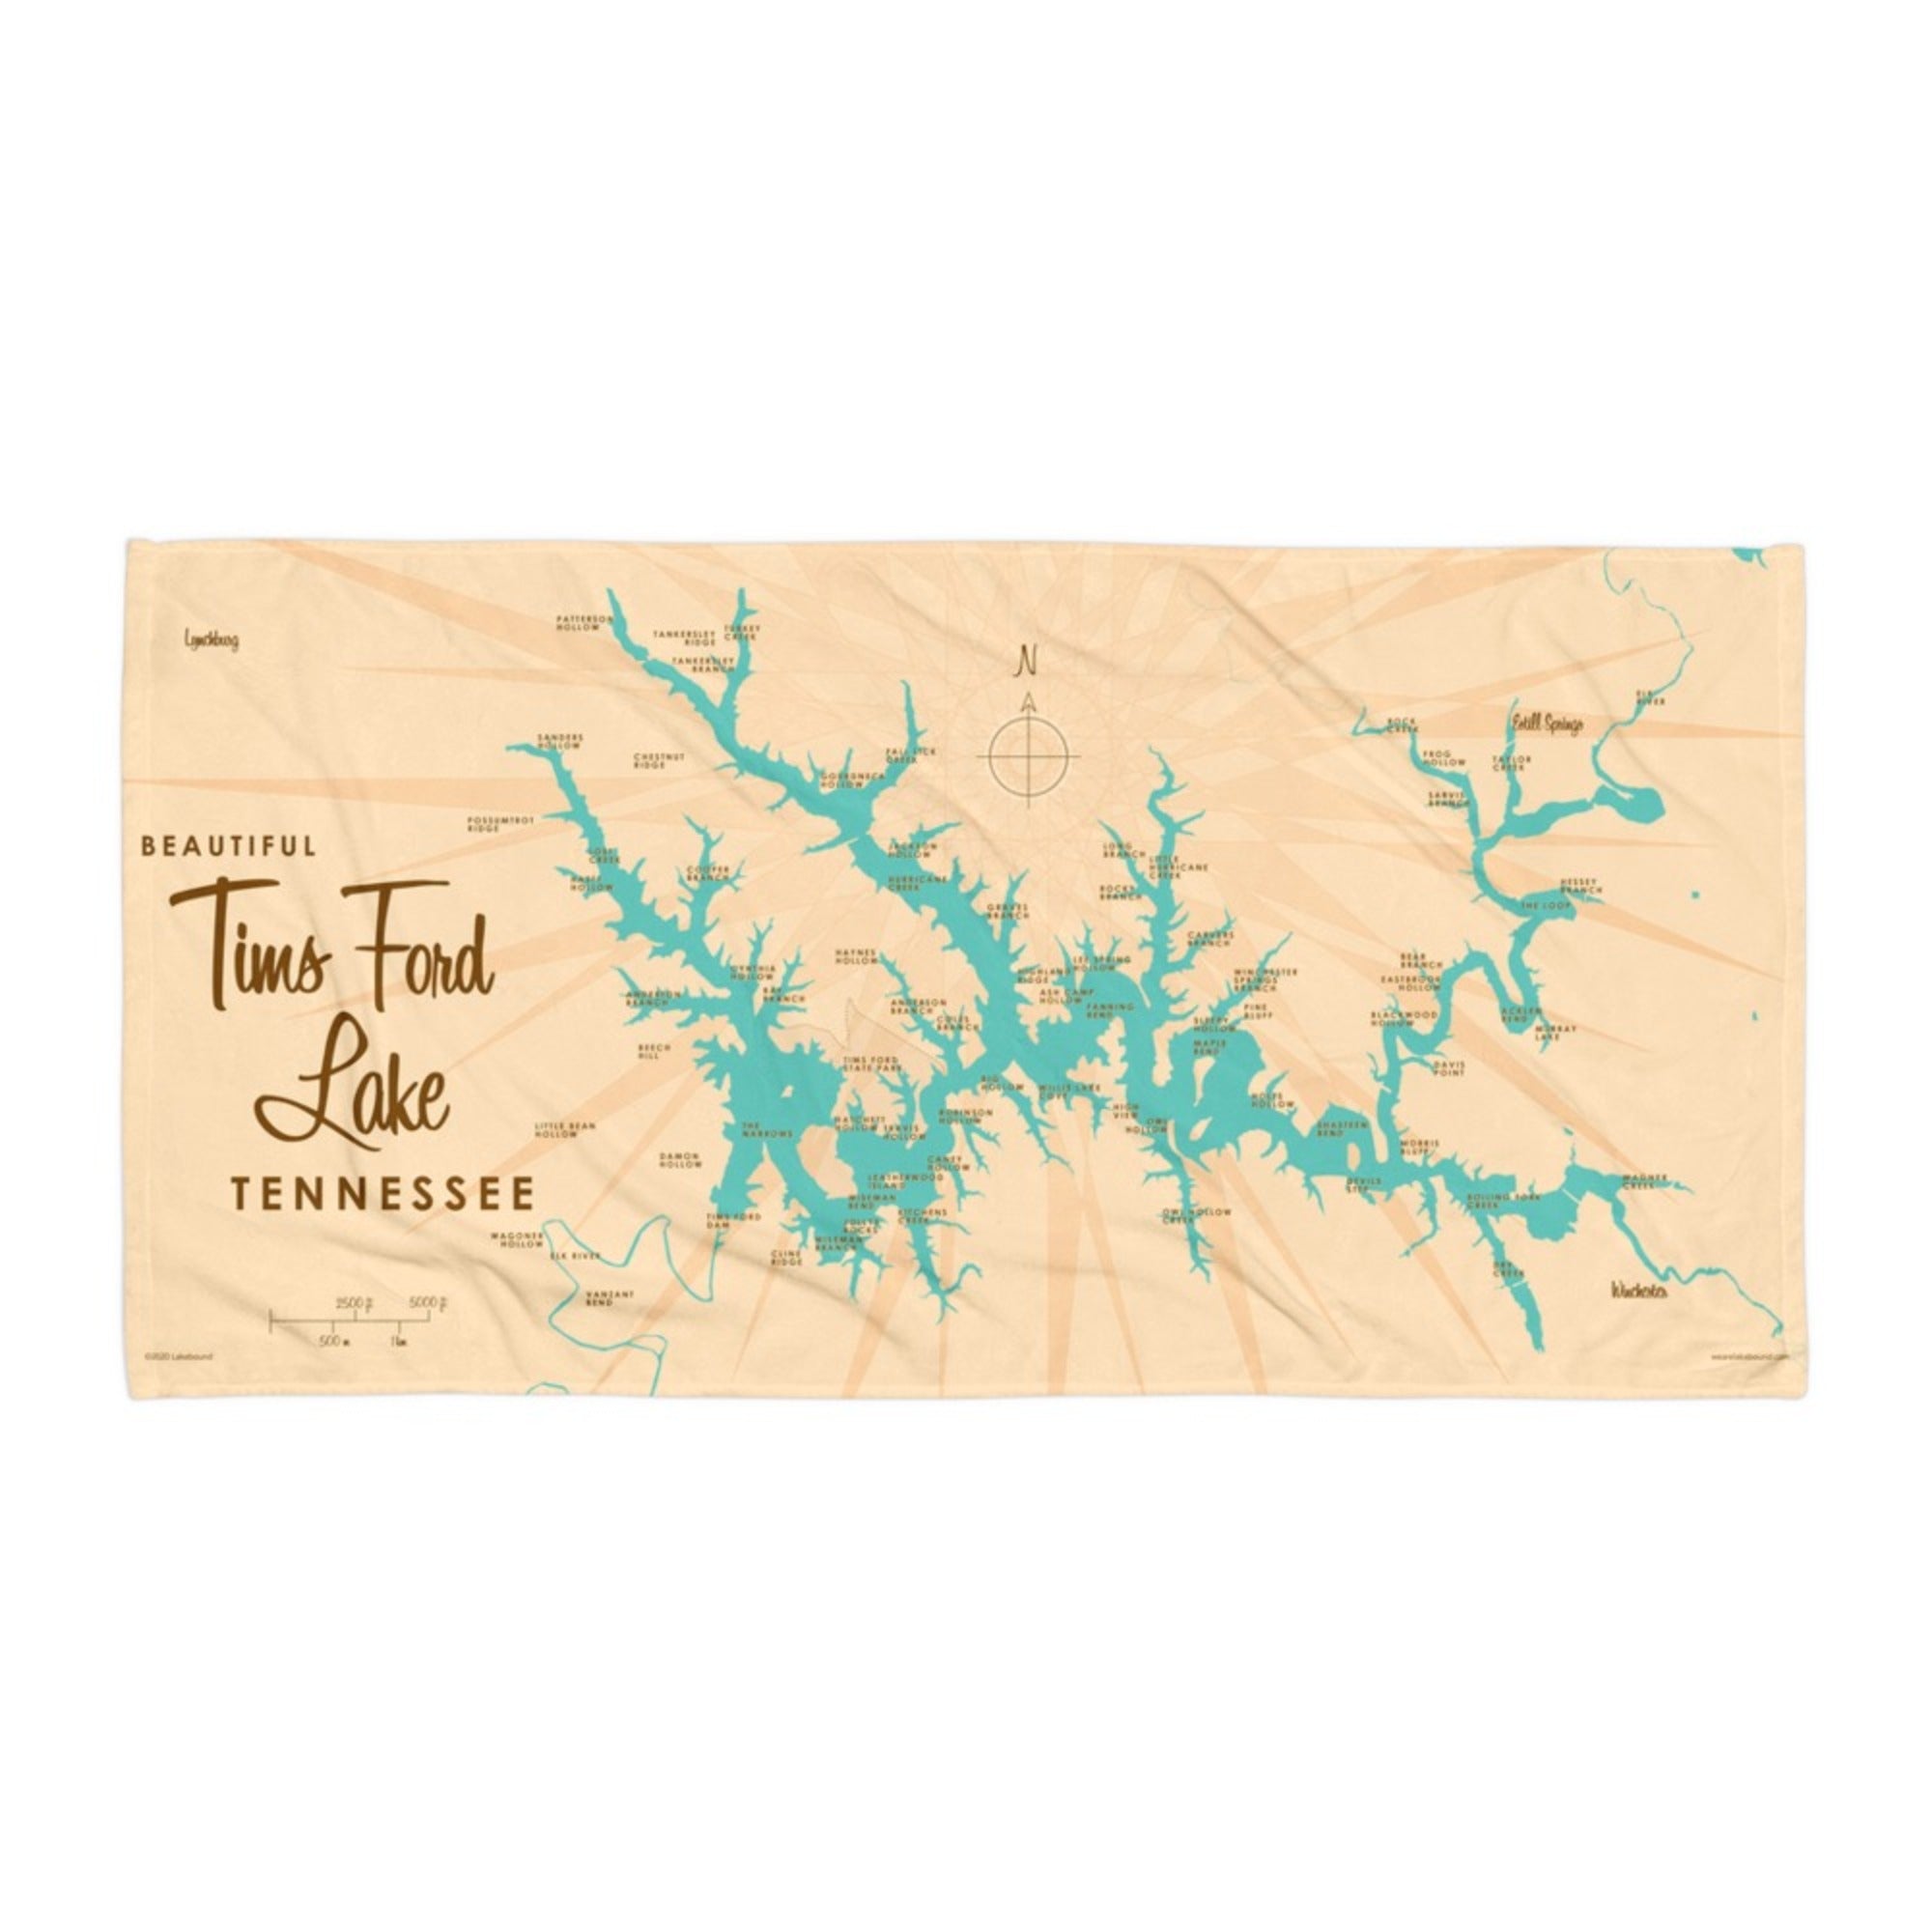 Tims Ford Lake Tennessee Beach Towel